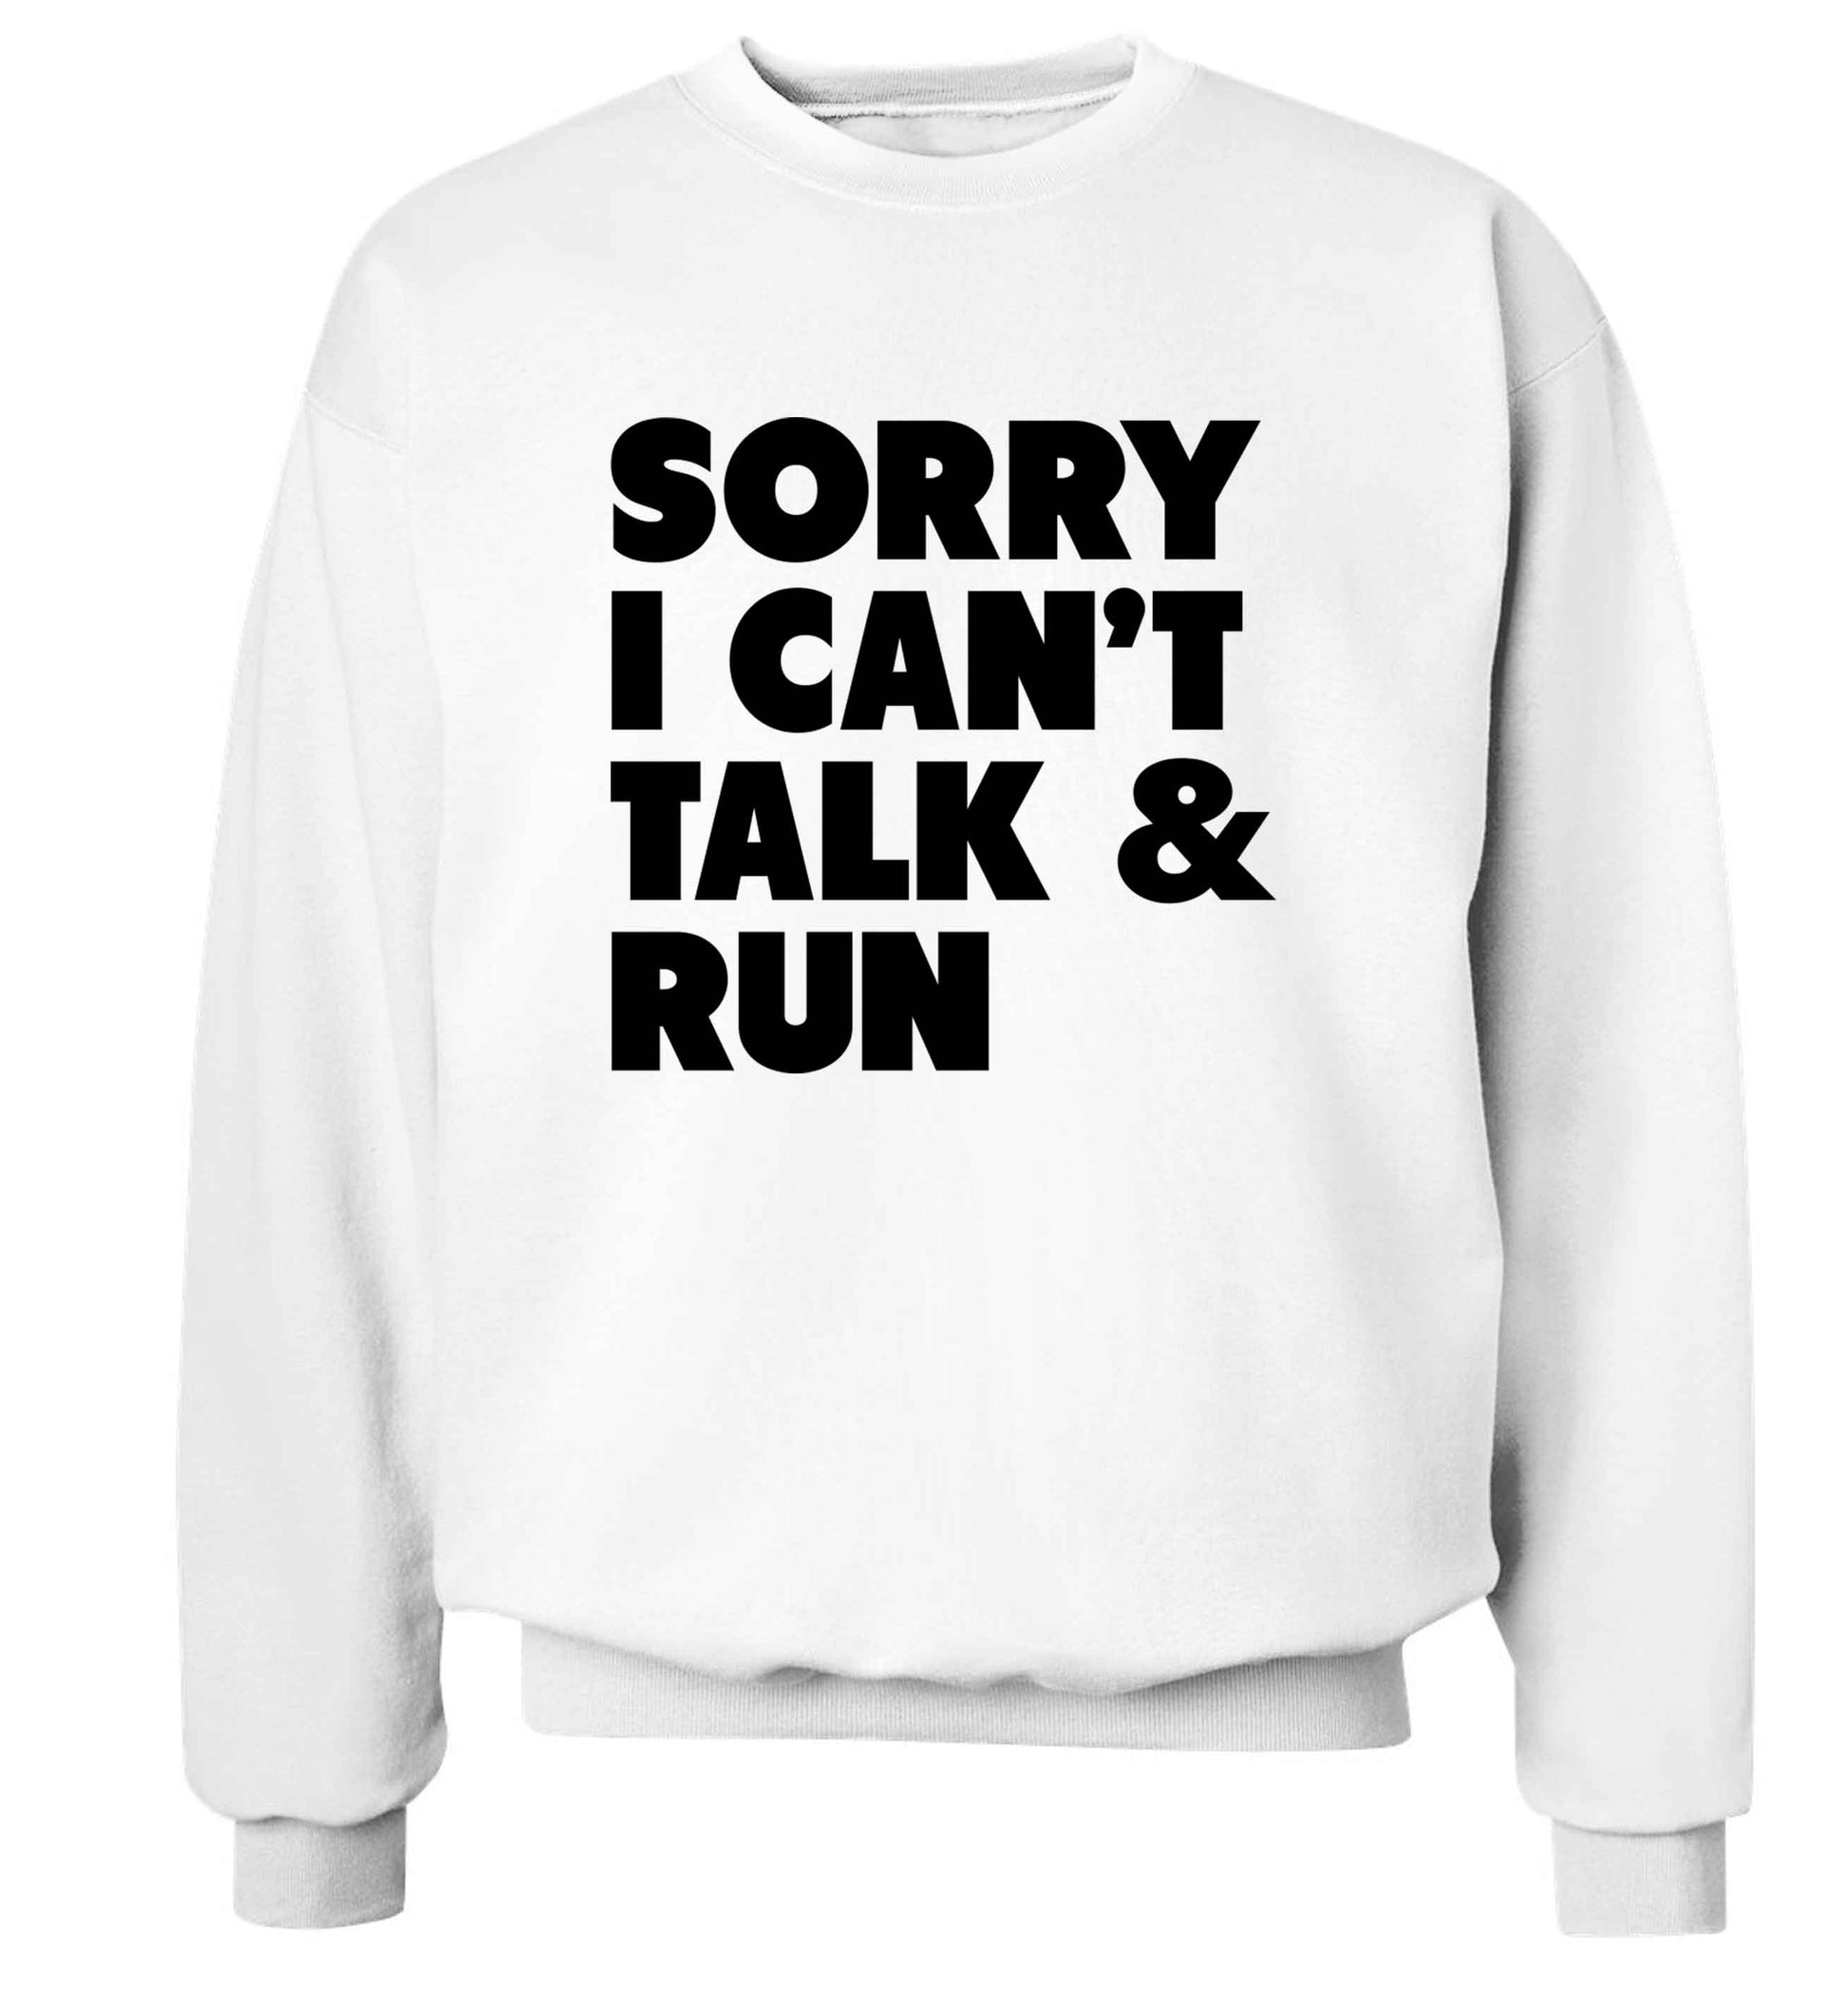 Sorry I can't talk and run adult's unisex white sweater 2XL